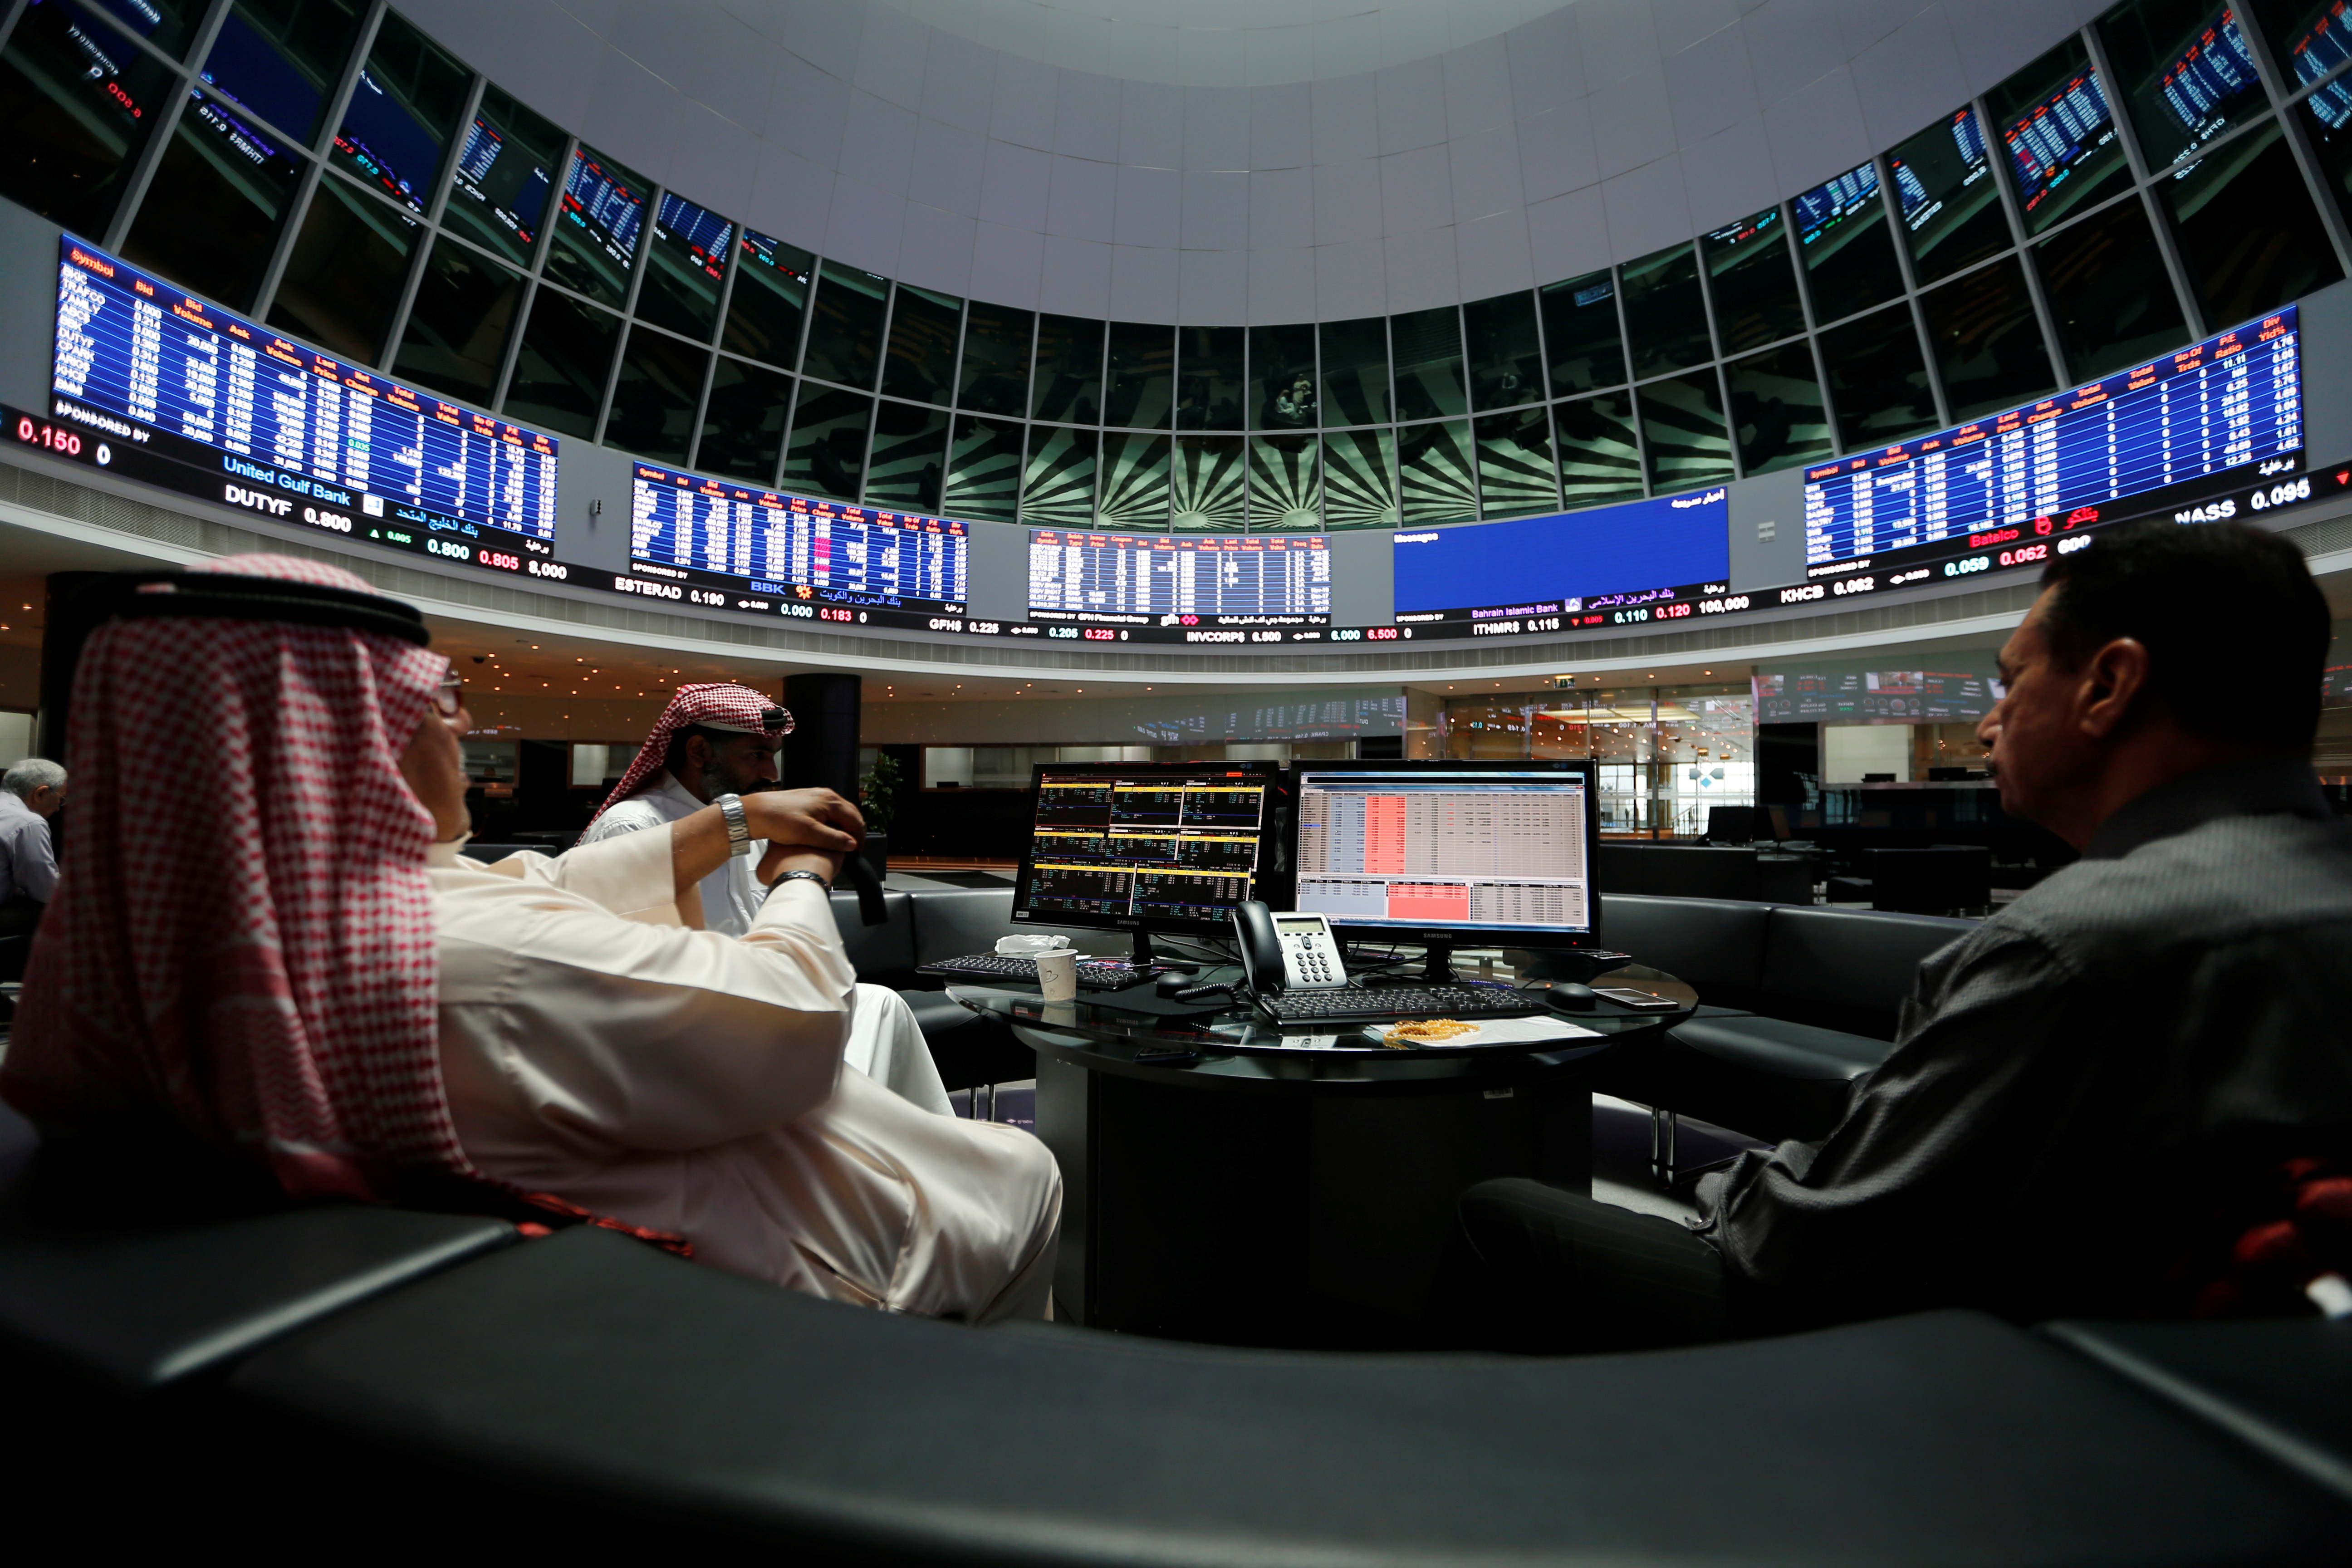 Traders chat during early hours after opening of the Bahrain stock market, in Manama